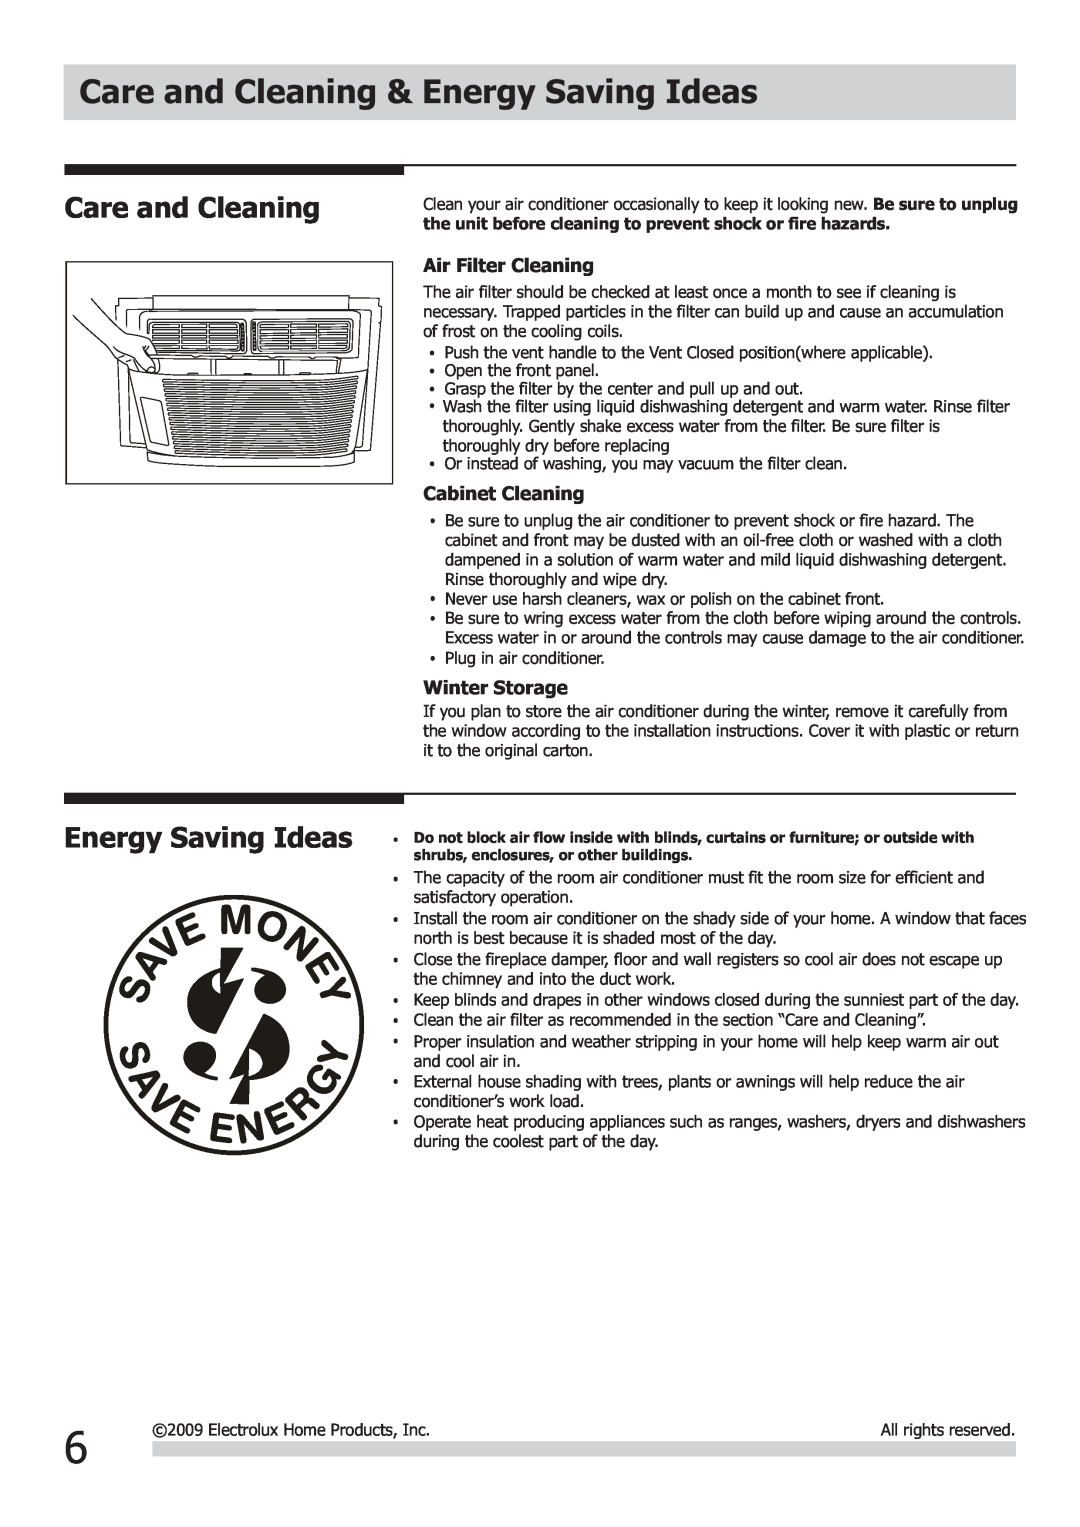 Frigidaire FRA082AT7 Care and Cleaning & Energy Saving Ideas, Air Filter Cleaning, Cabinet Cleaning, Winter Storage 